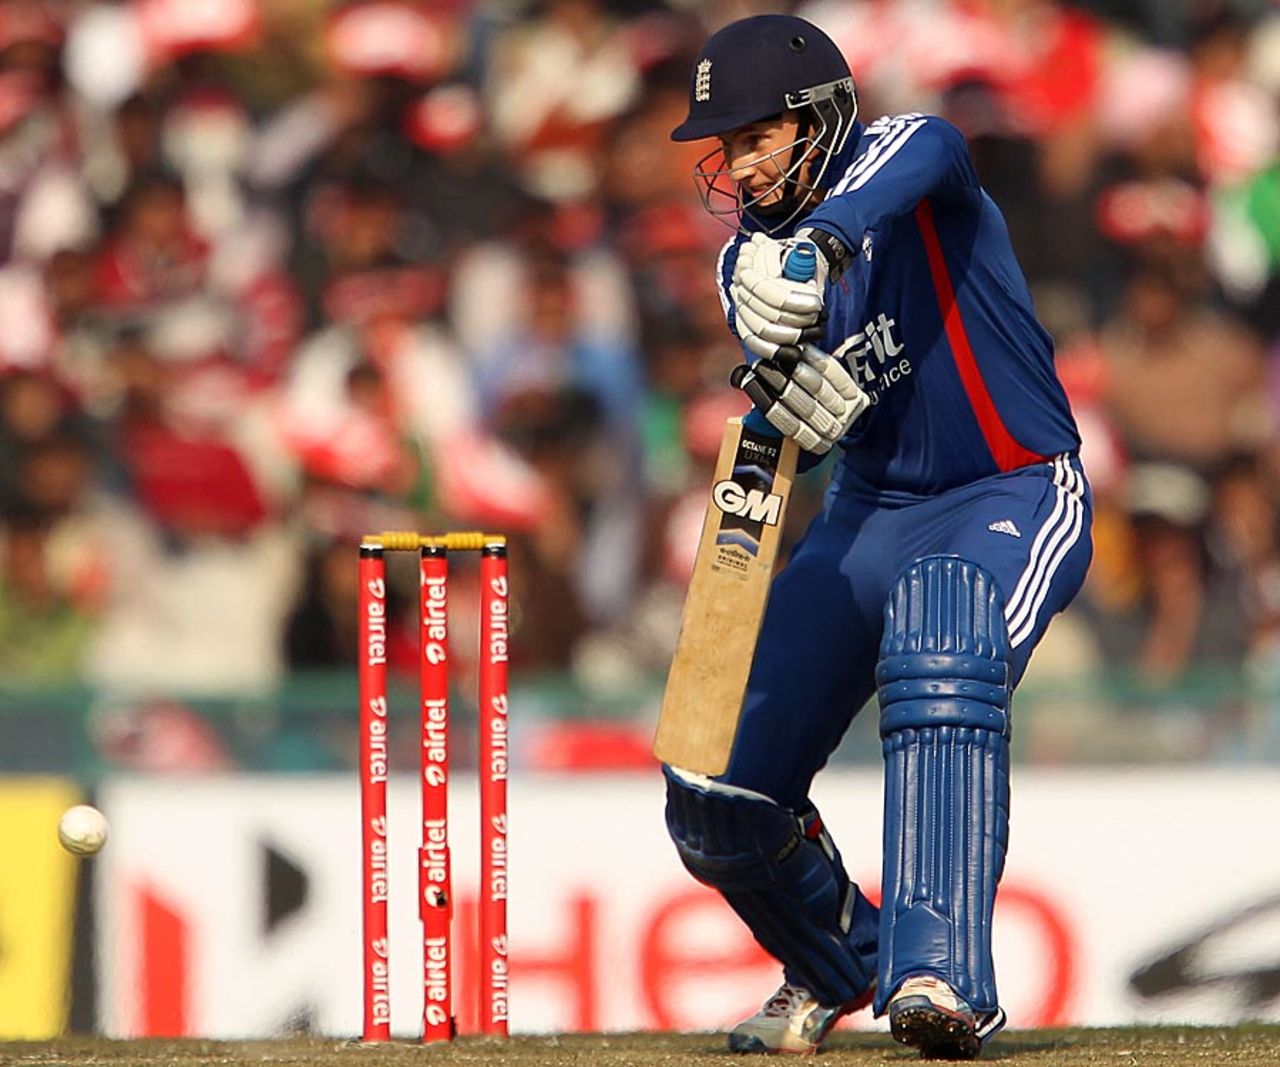 Joe Root defends solidly, India v England, 4th ODI, Mohali, January 23, 2013